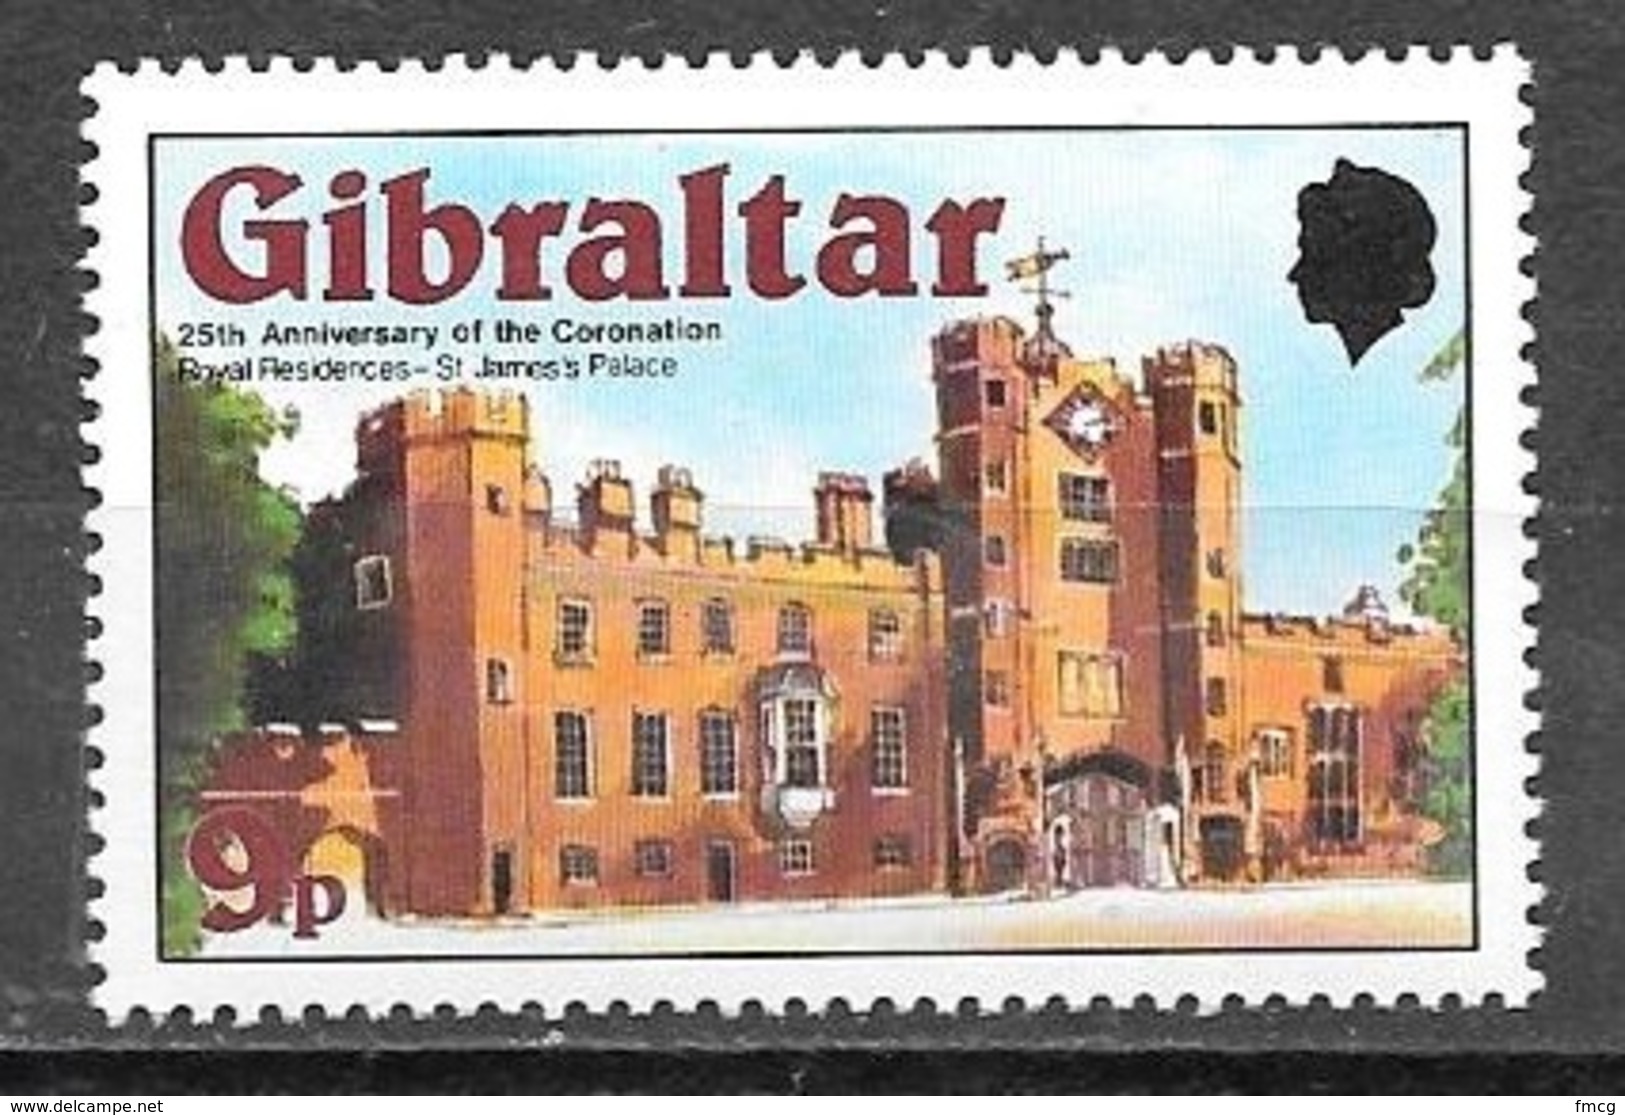 1978 25th Anniversary Of Coronation, 9p, Mint Never Hinged - Gibraltar